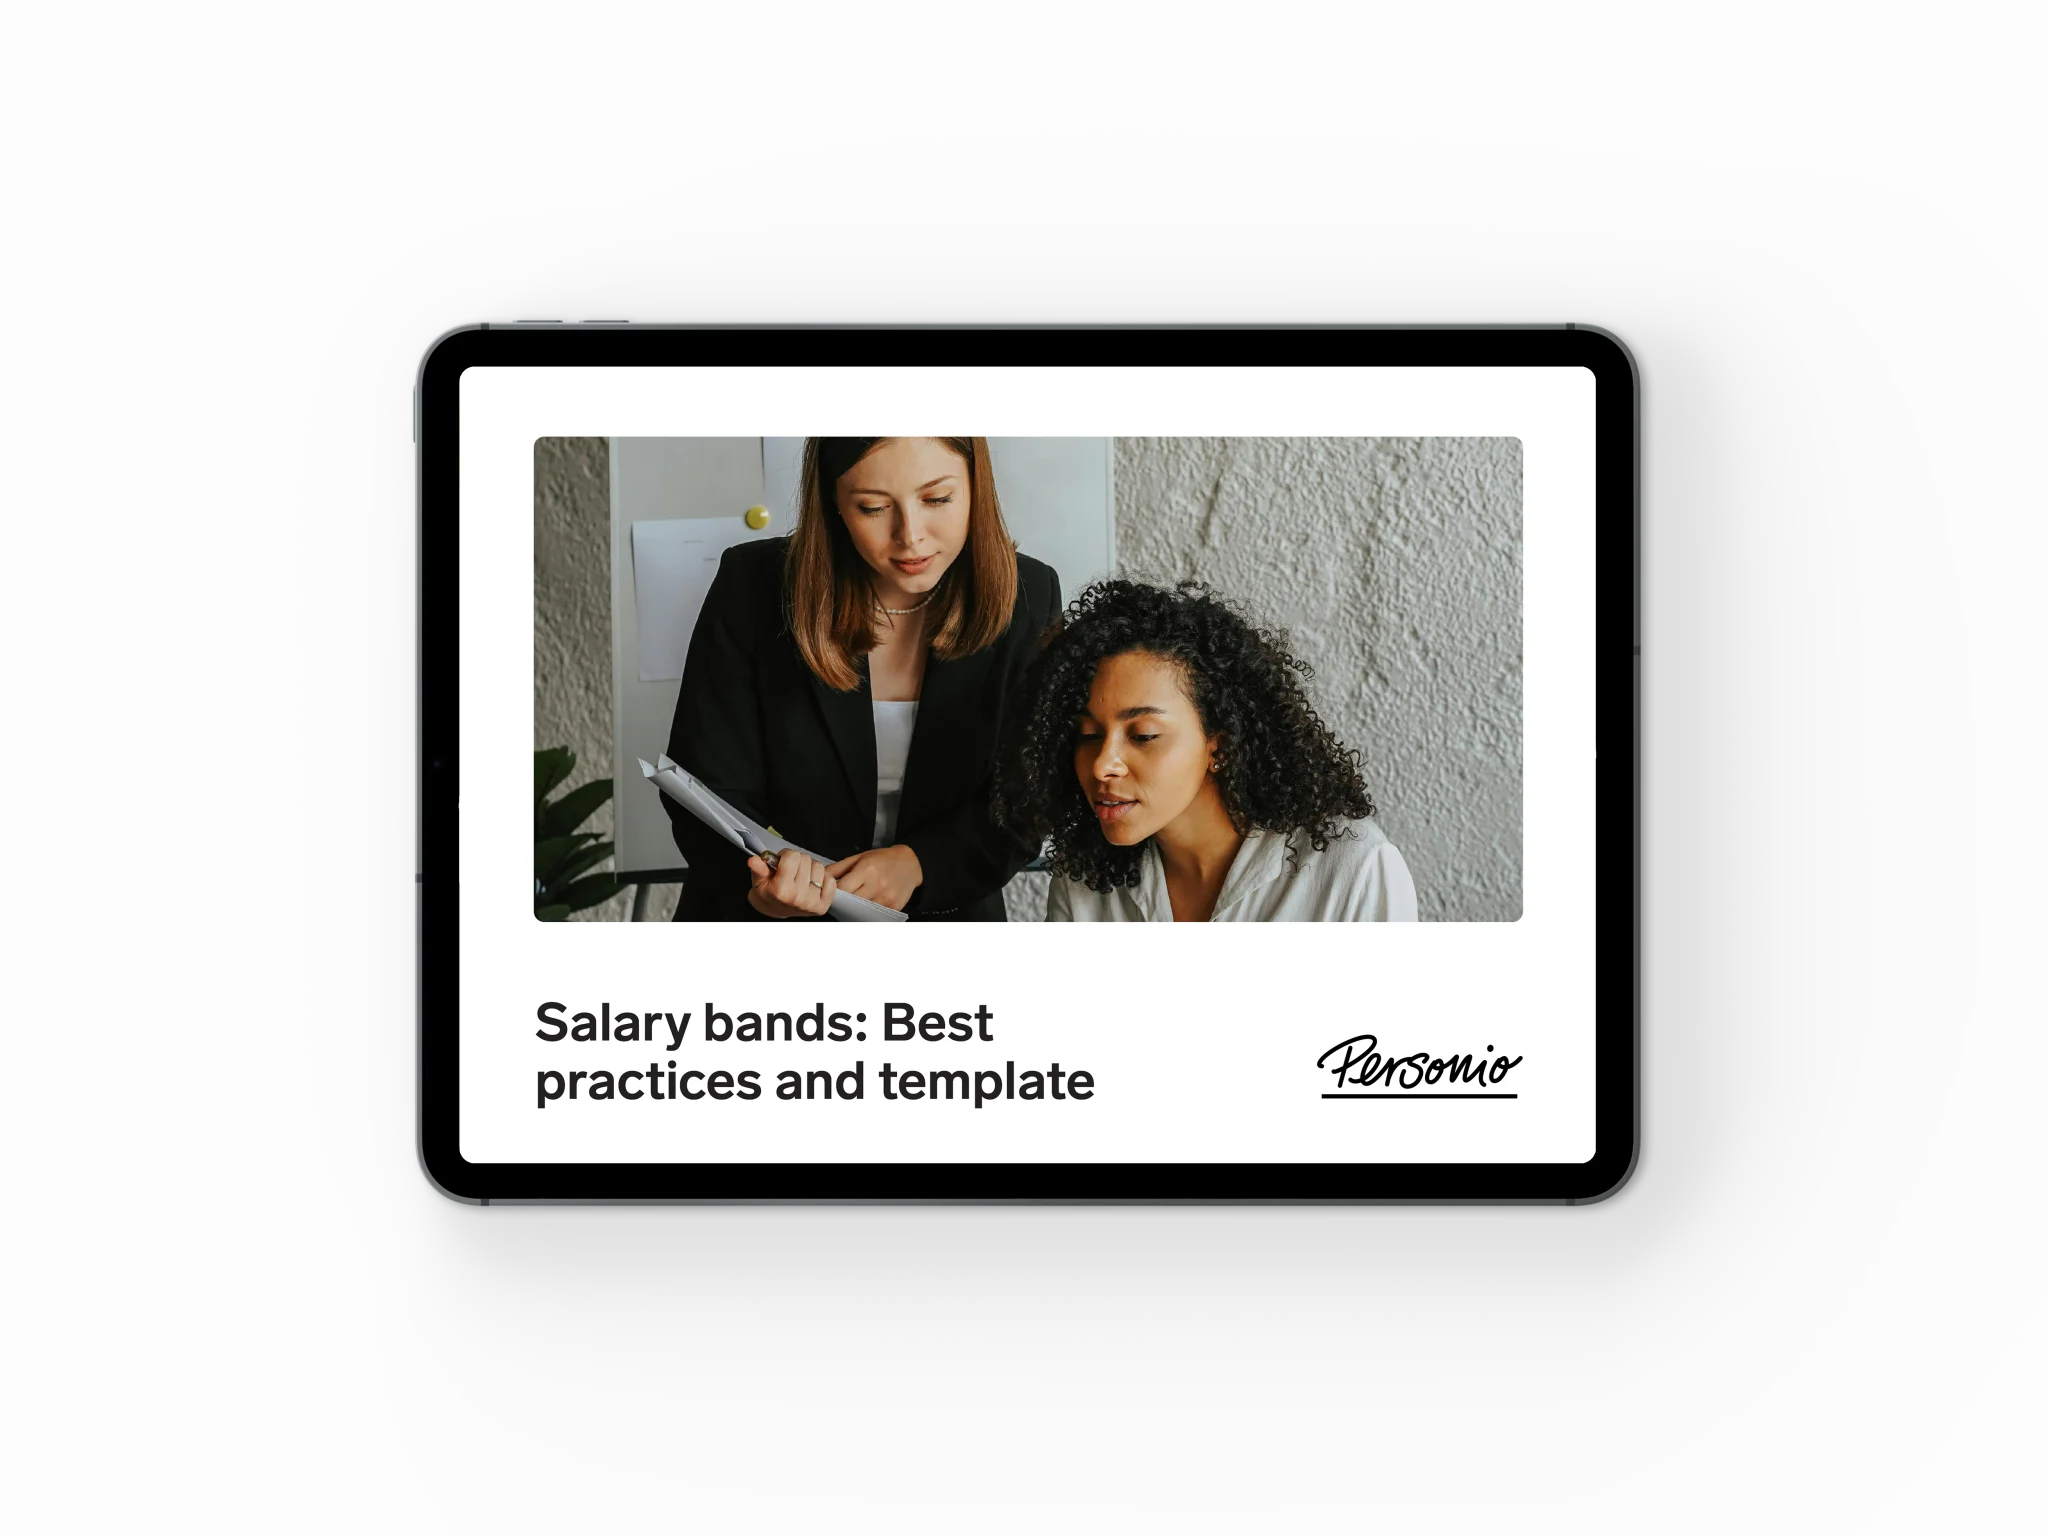 Template Salary bands